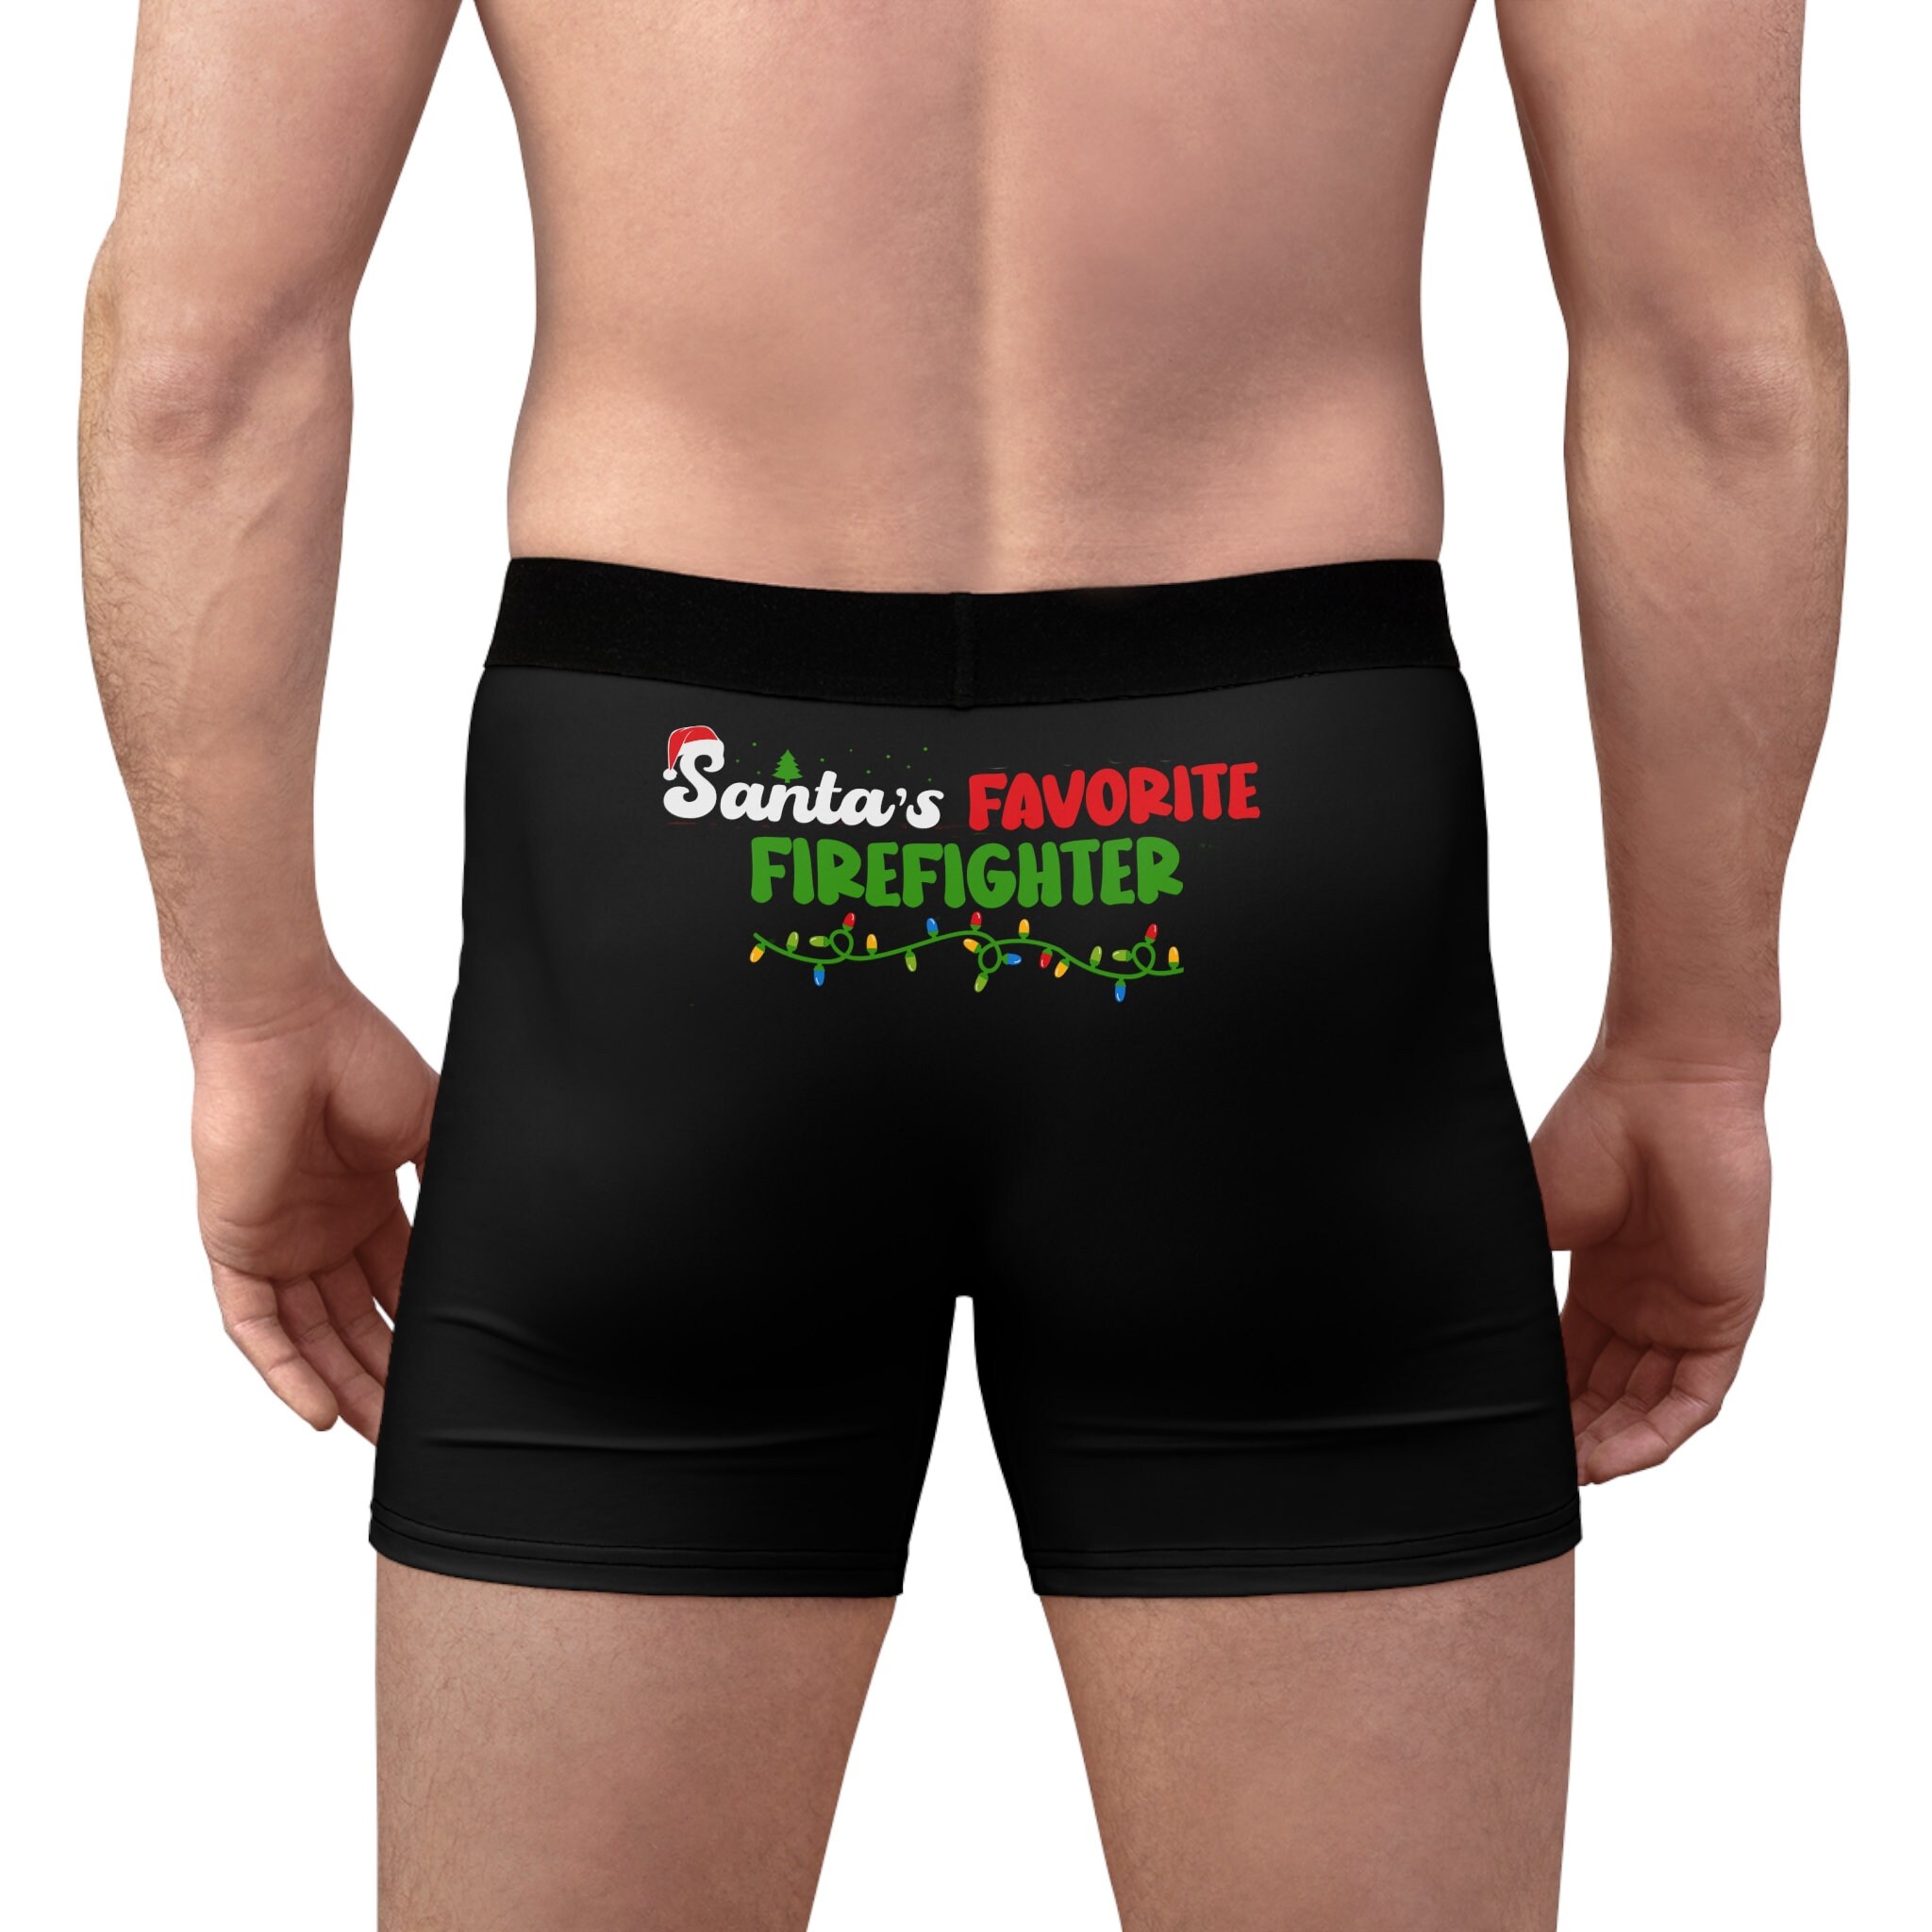 Buy Men's Modal Elephant Nose Triangle Briefs Underwear, Blk+red+rbl, Small  at